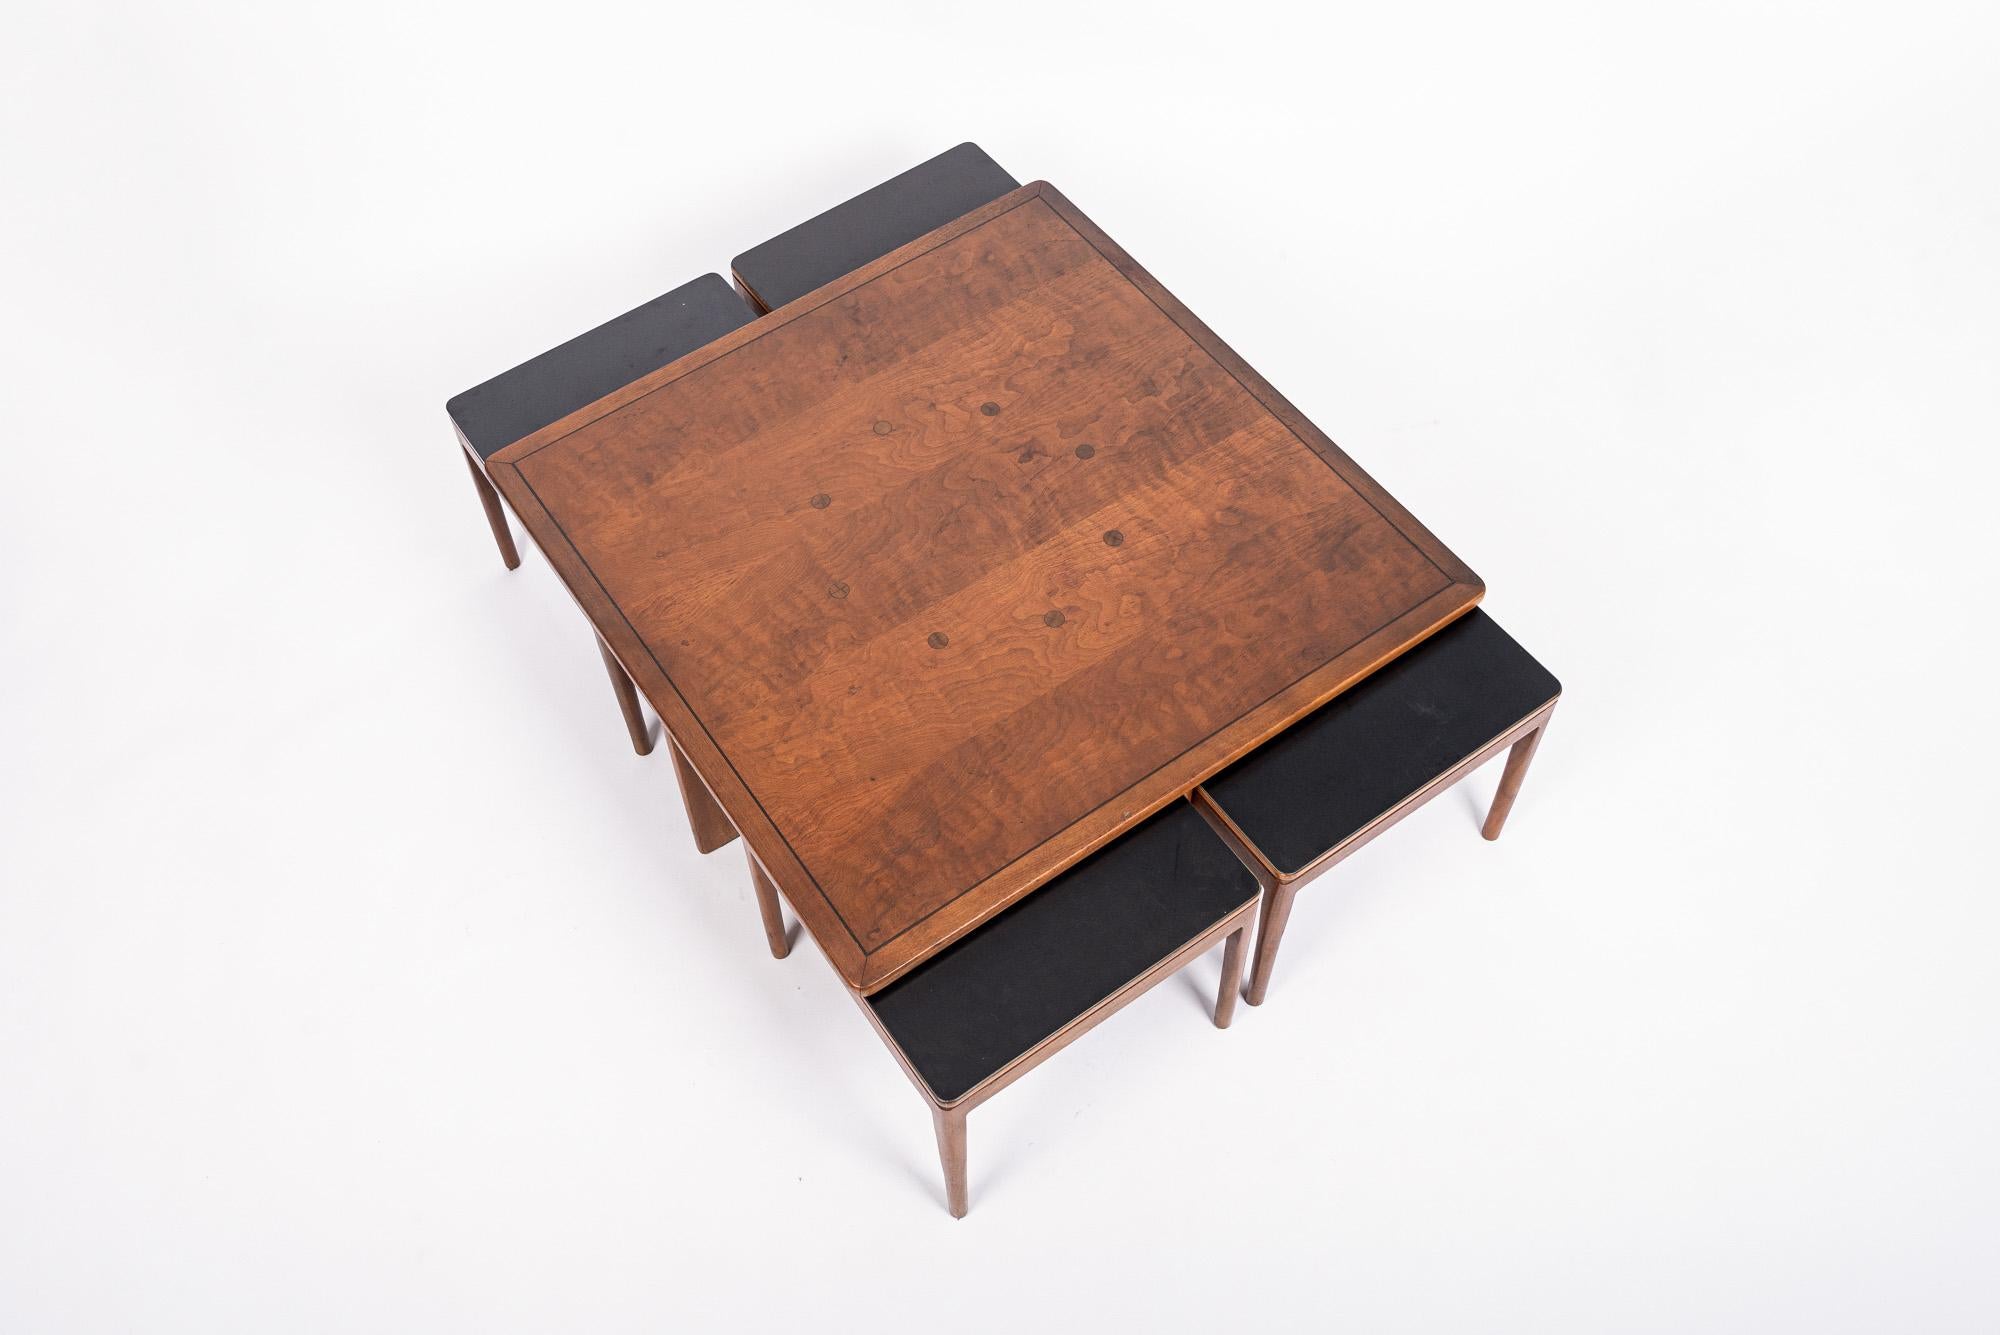 This vintage mid century modern square wooden coffee table with four end tables was designed by Kipp Stewart for Drexel and produced in 1960. The table has classic Danish modern design with clean, minimalist, geometric lines and beautiful